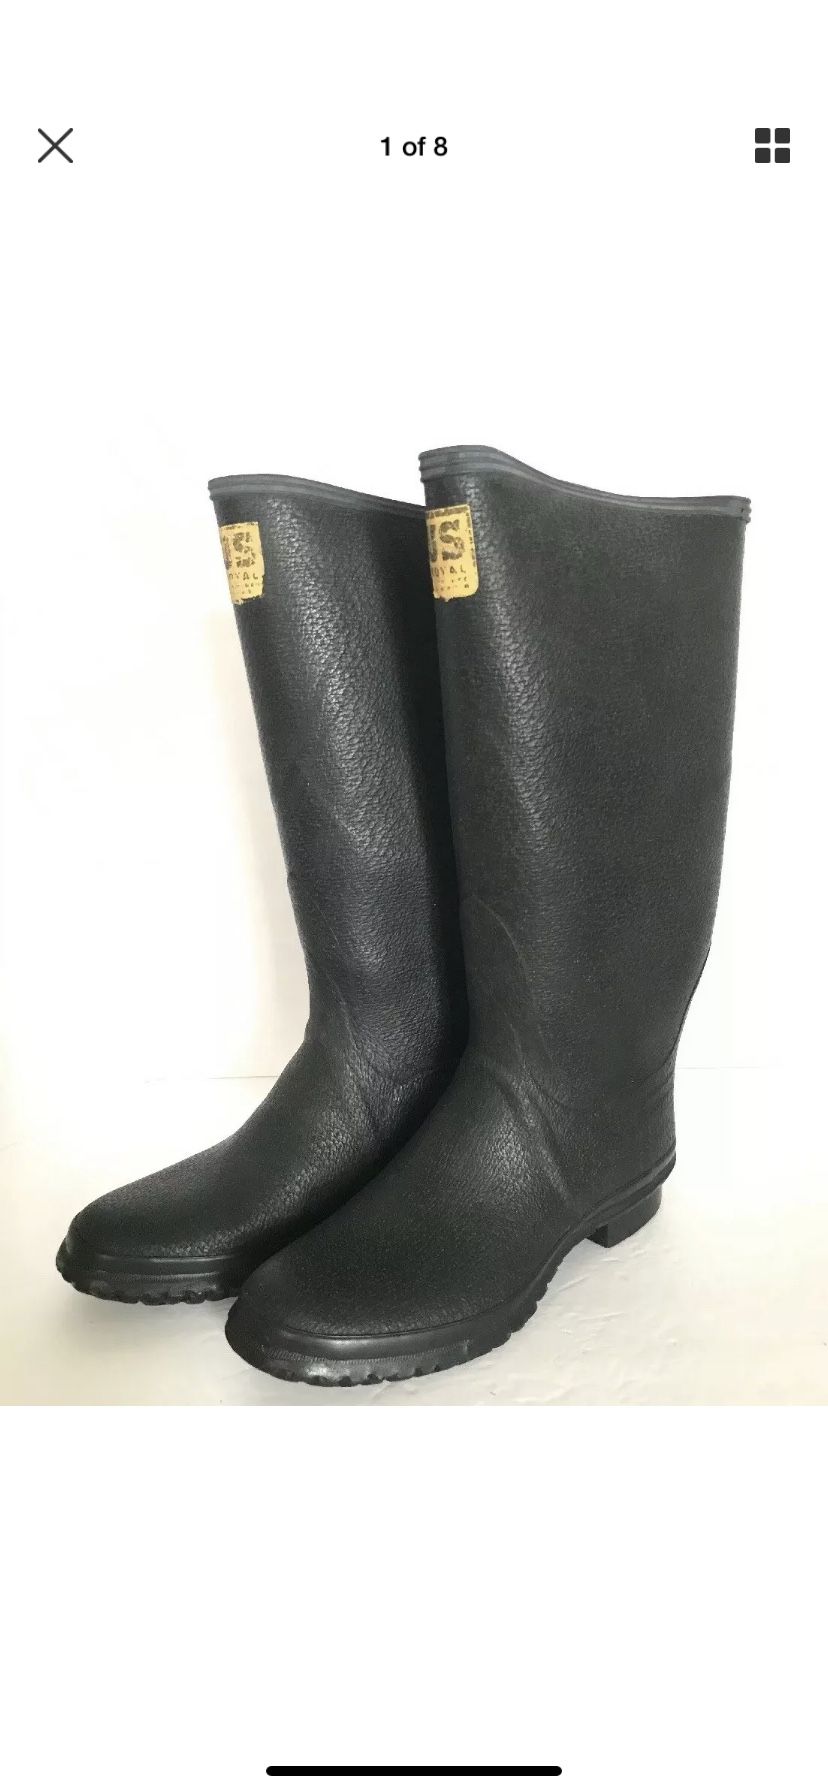 Size 10 US Royal Tempered Rubber Boots Vintage There is no size marked on the boot. They were tried on by a model and measured for size they fit a US